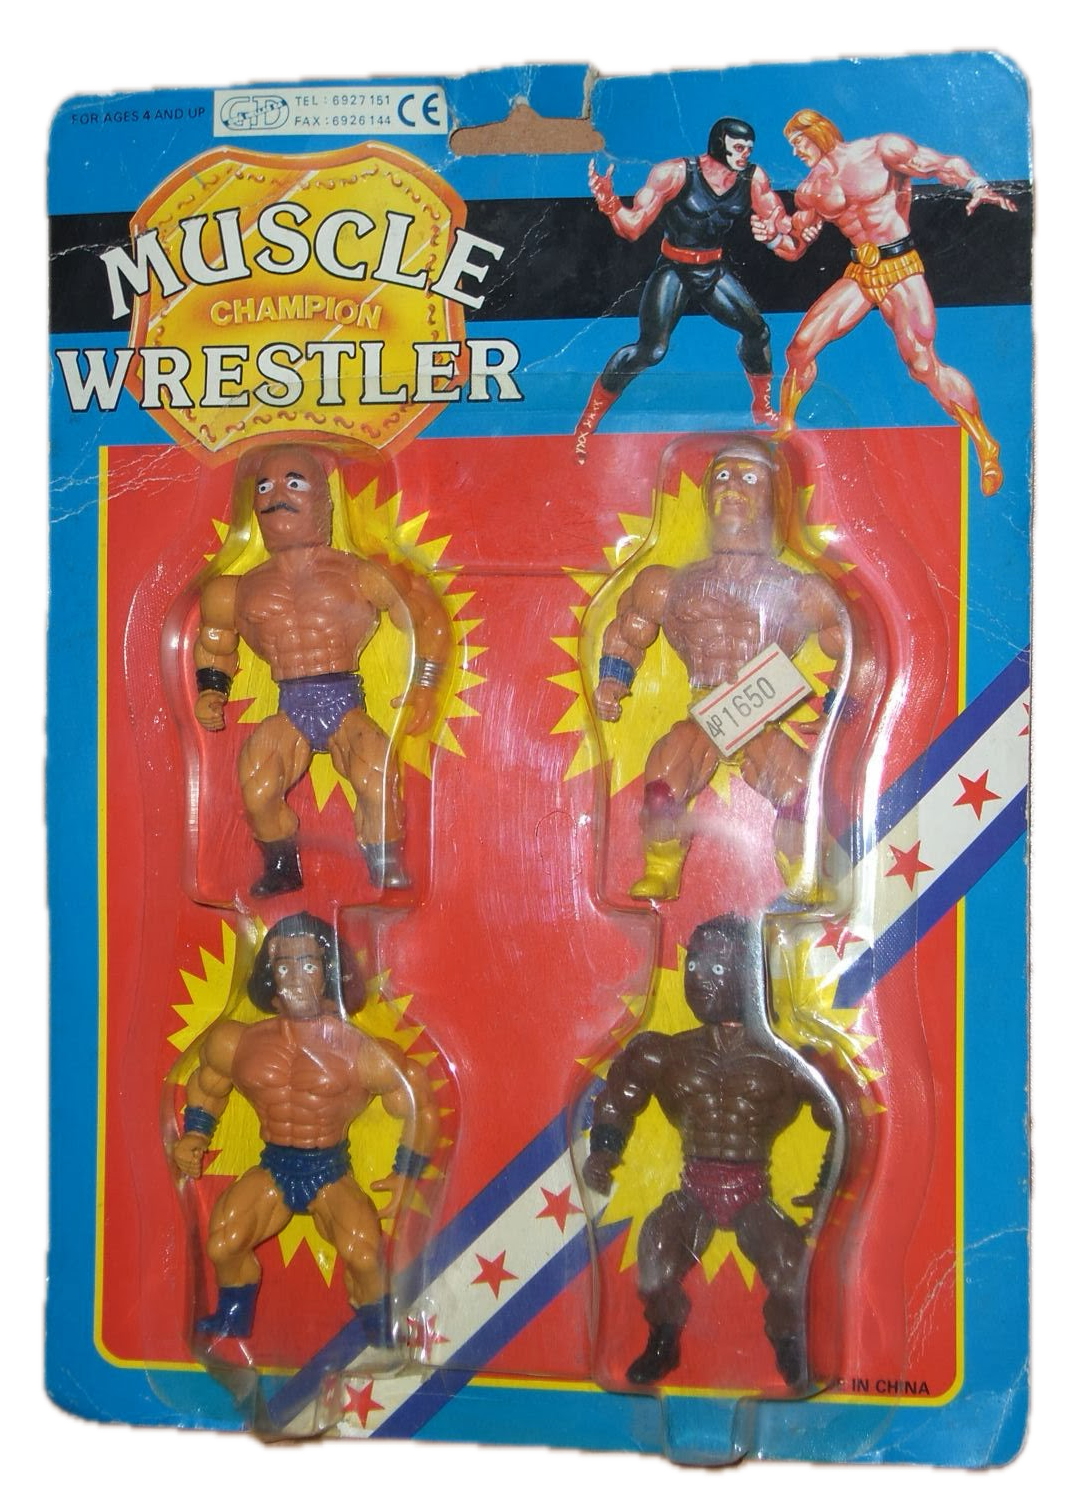 Muscle Champion Wrestler Bootleg/Knockoff 4-Pack: Iron Sheik, Hulk Hogan, Andre the Giant & Undetermined